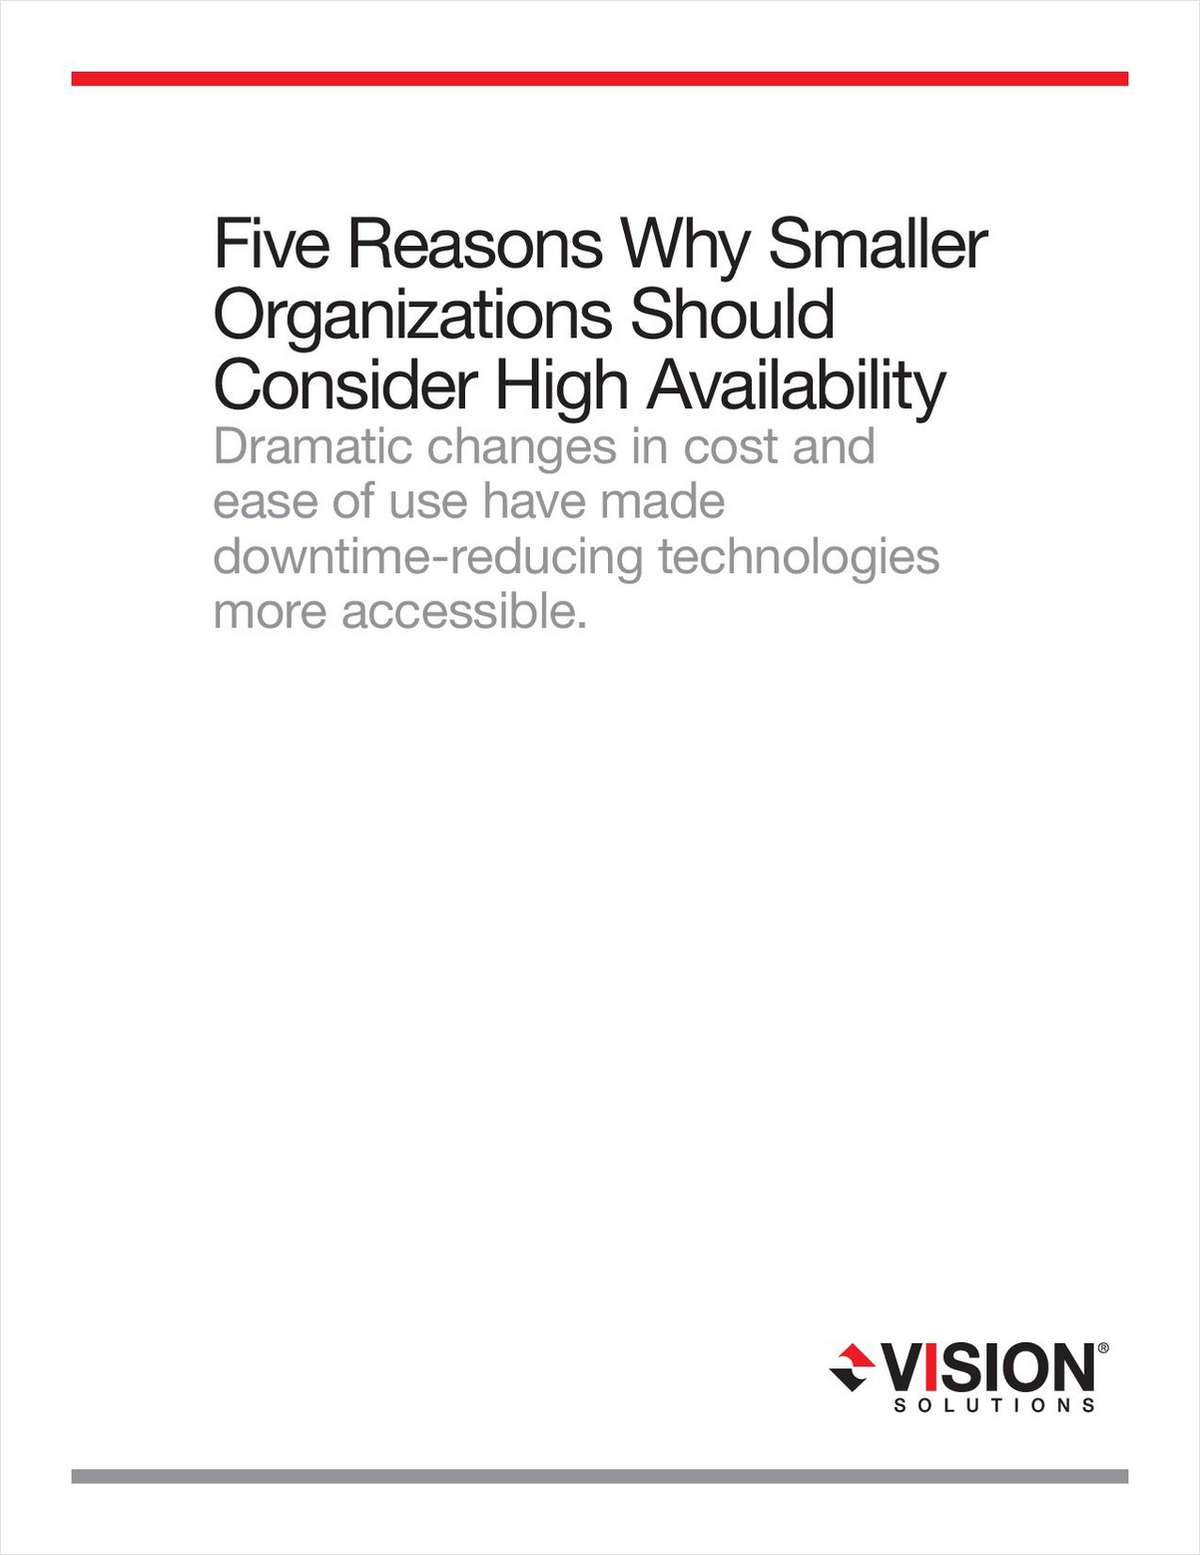 Five Reasons Why Smaller Organizations Should Consider System i (AS/400) High Availability